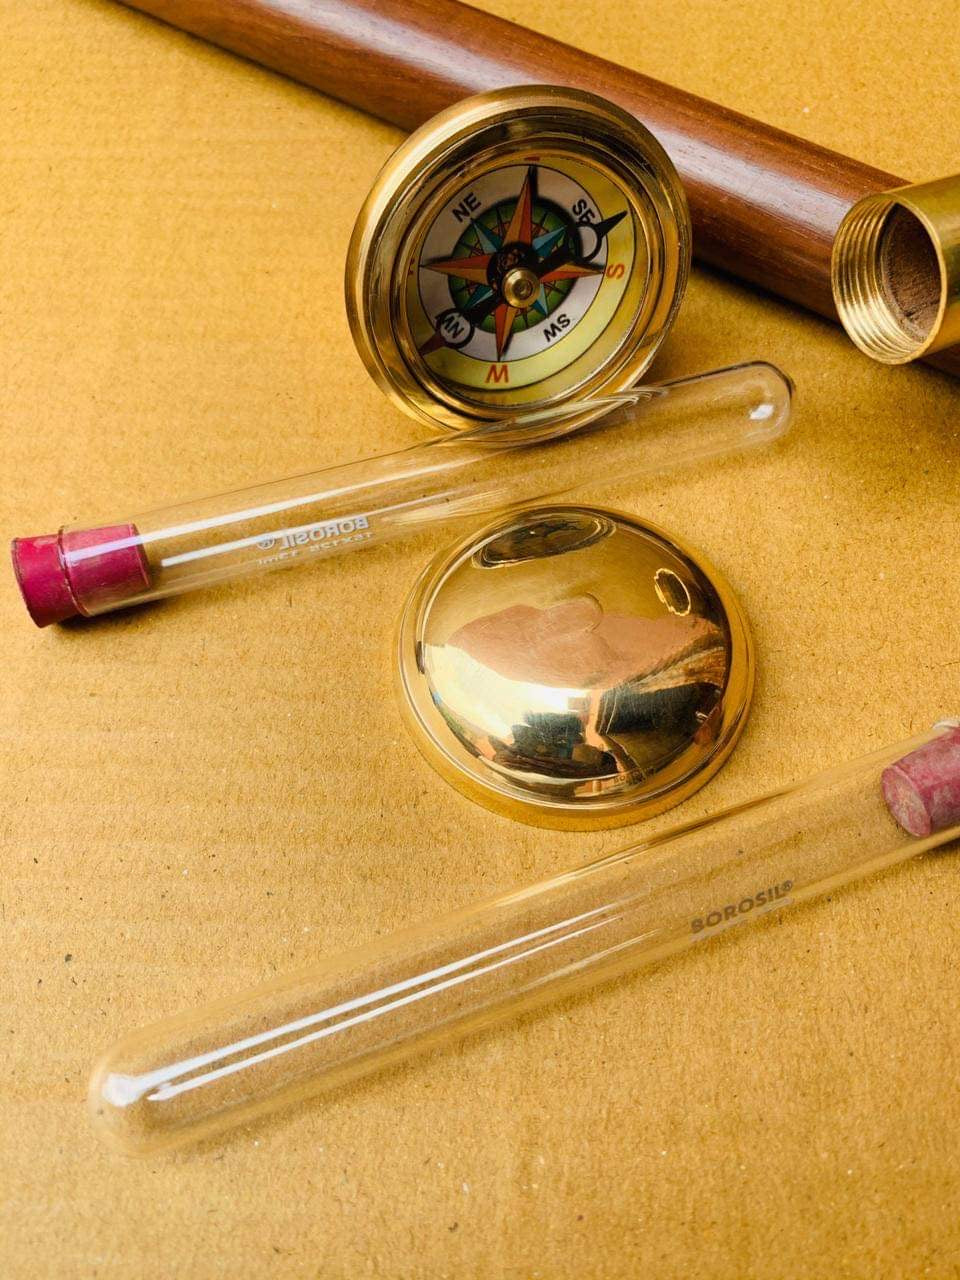 Walking Sticks with compass and glass vial